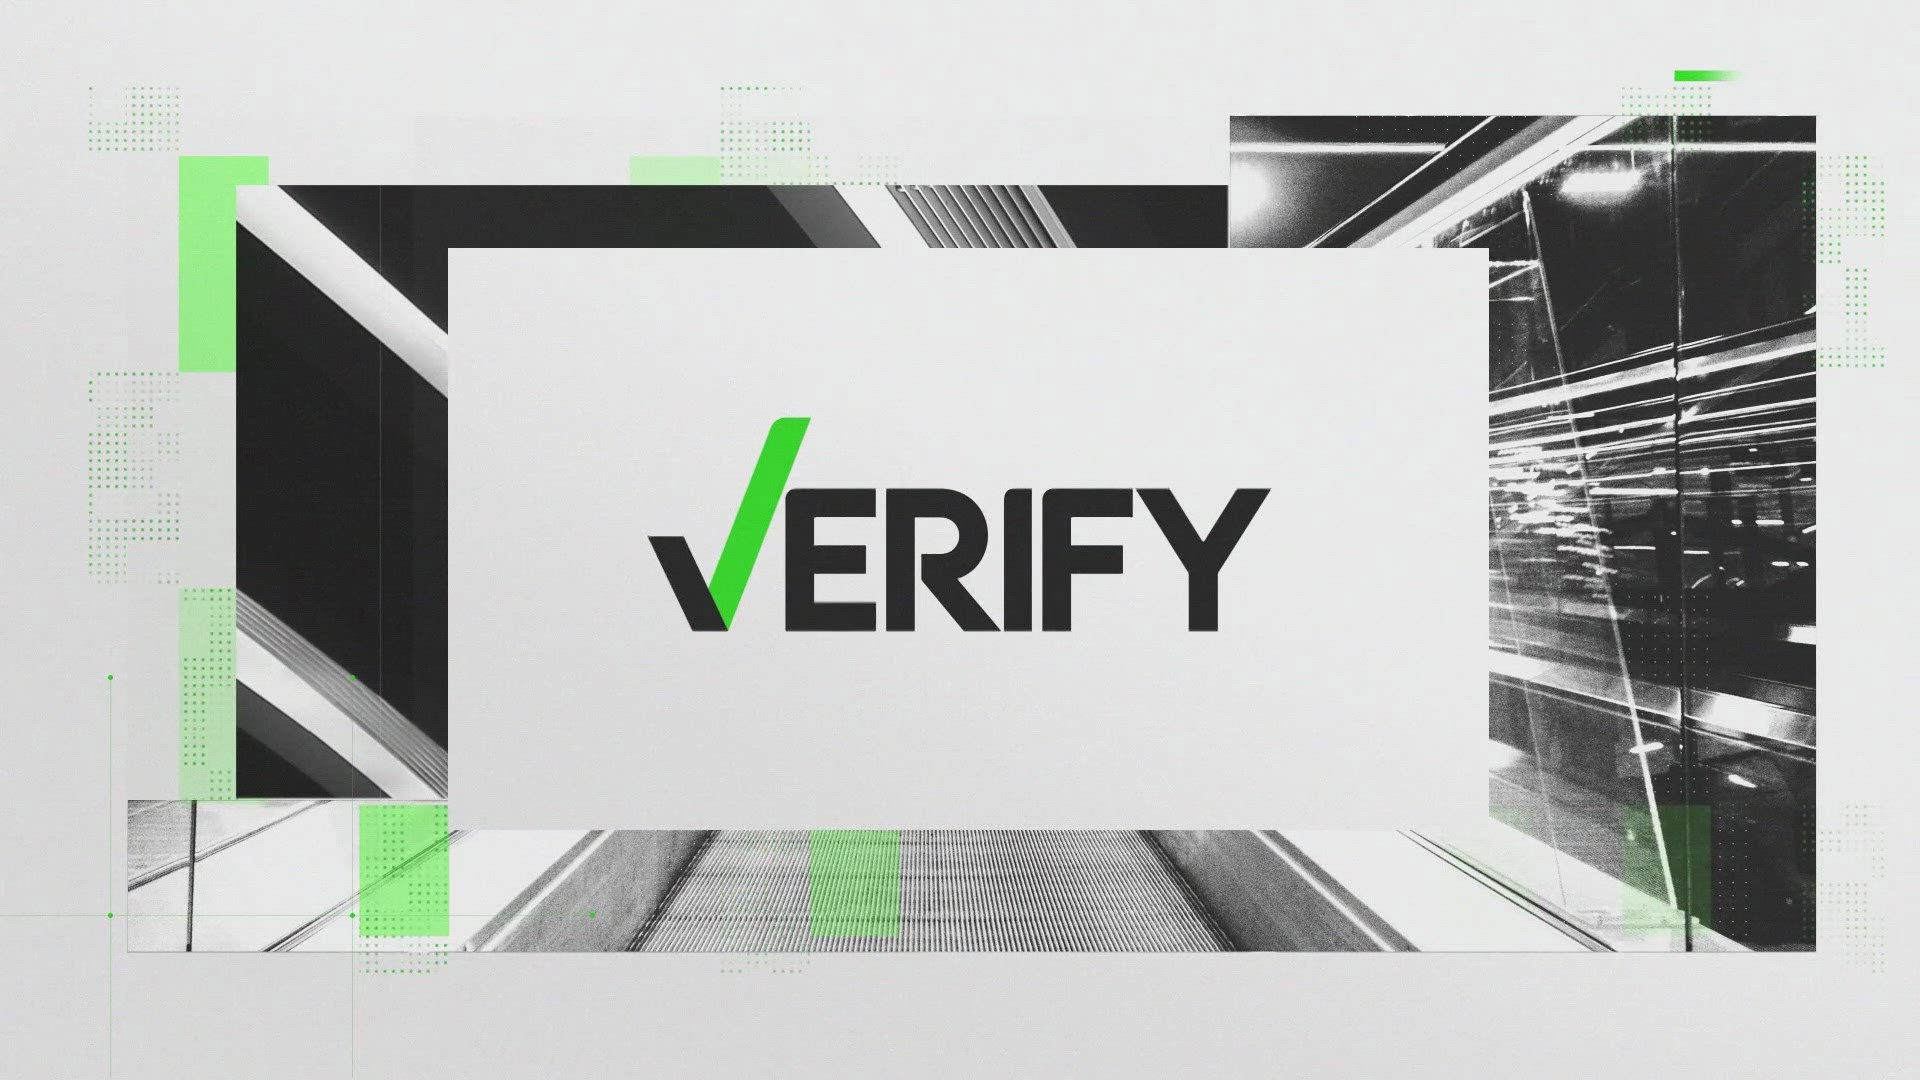 Verify is all about trying to make a difference in the community by making sure the community has the right information.